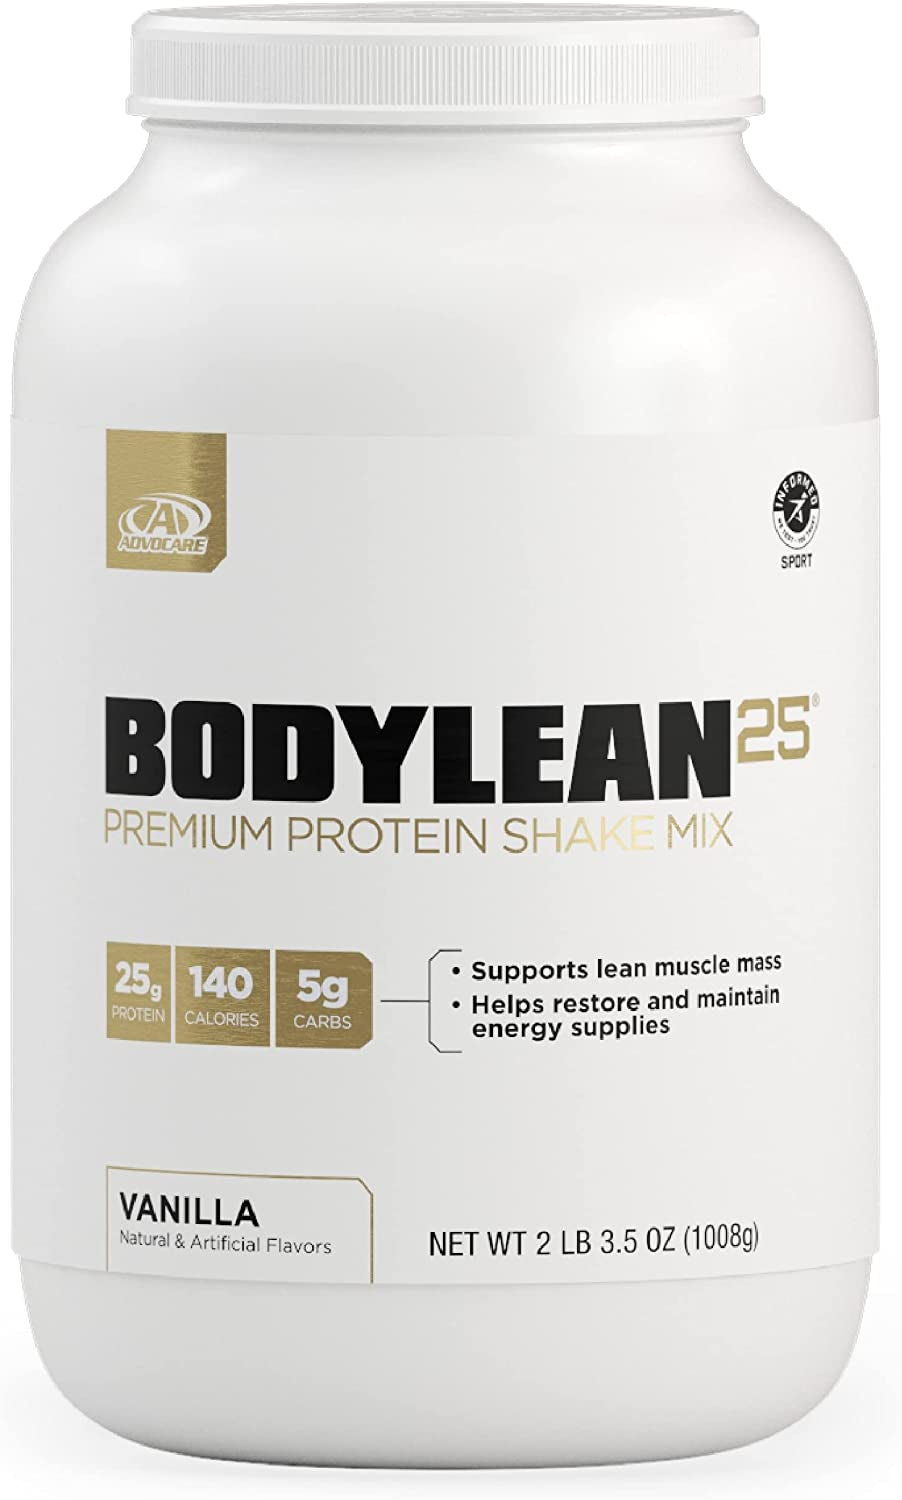 Advocare Bodylean25 Protein Shake Mix - Whey Protein Powder for Muscle Building - Whey Isolate Protein Powder - Whey Concentrate Protein Powder - Protein Shakes Powder - Vanilla - 2 Lb 4.5 Oz